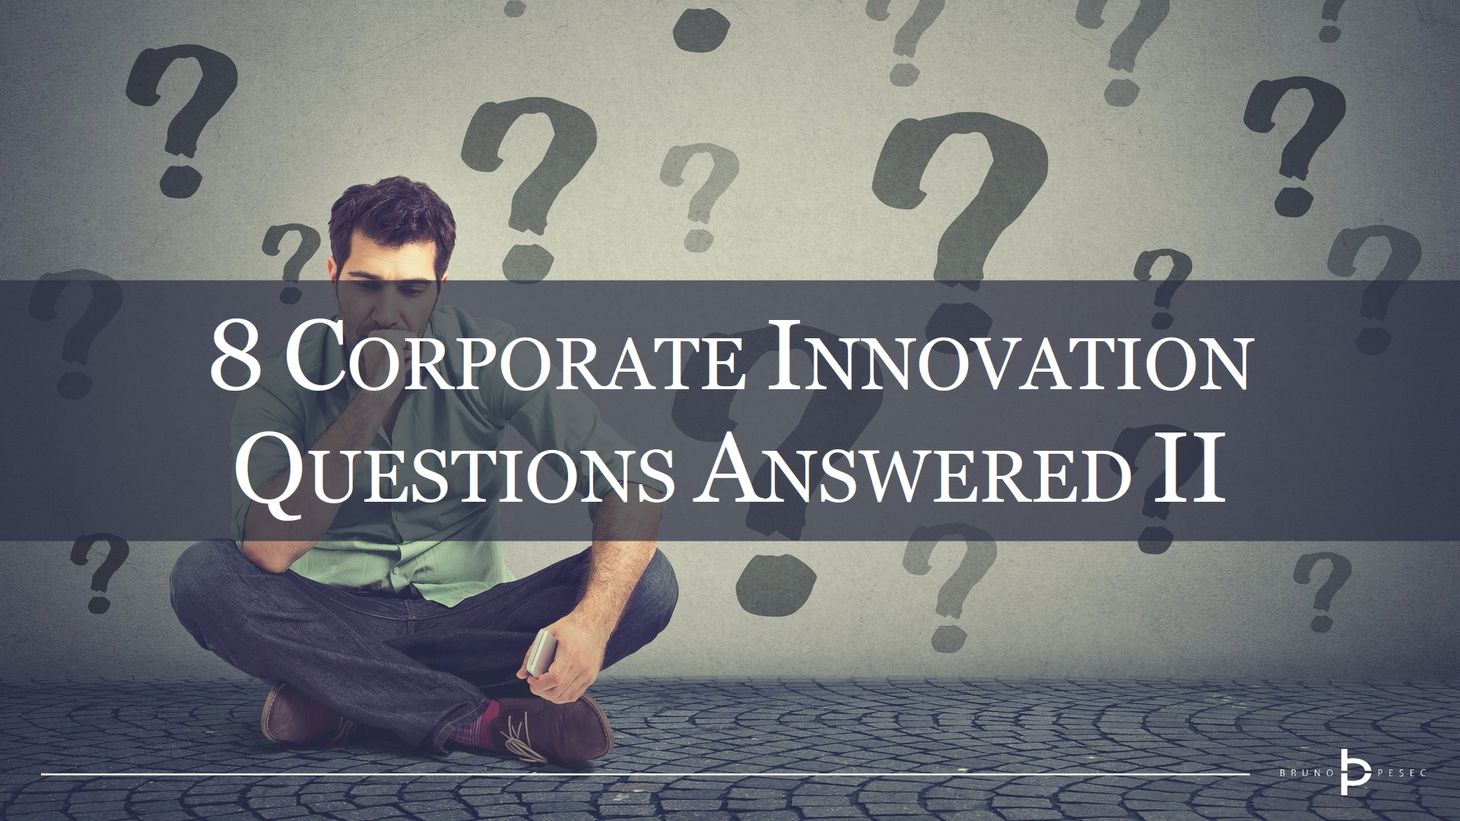 Eight more corporate innovation questions answered